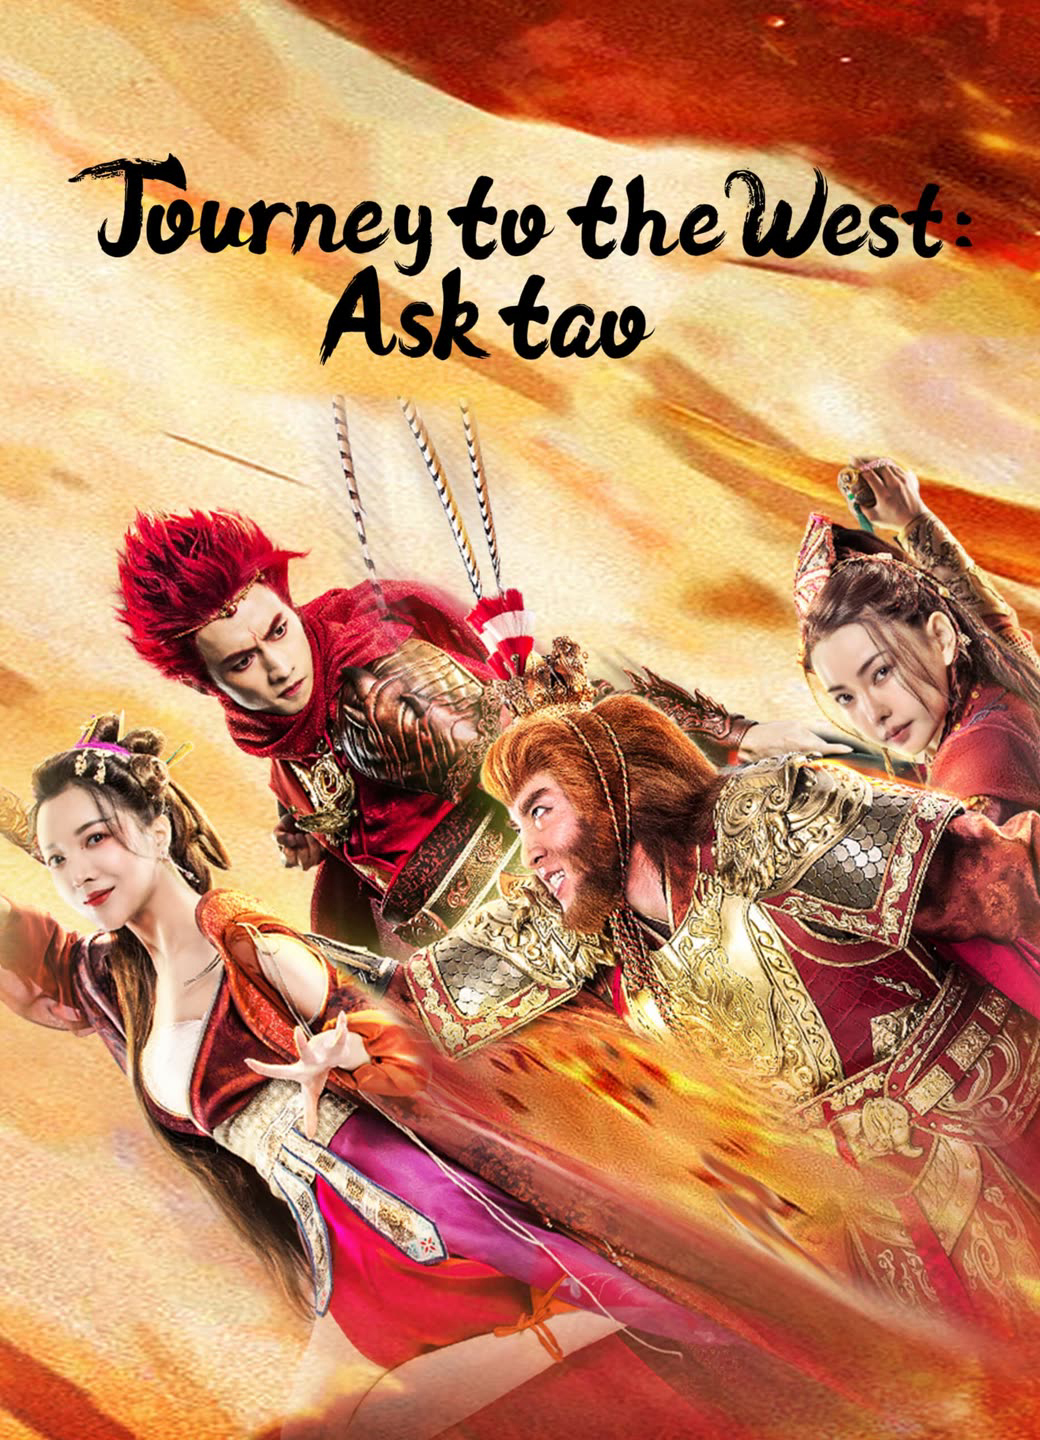 Poster Phim Tây Du Vấn Đạo (Journey to the West: Ask tao)